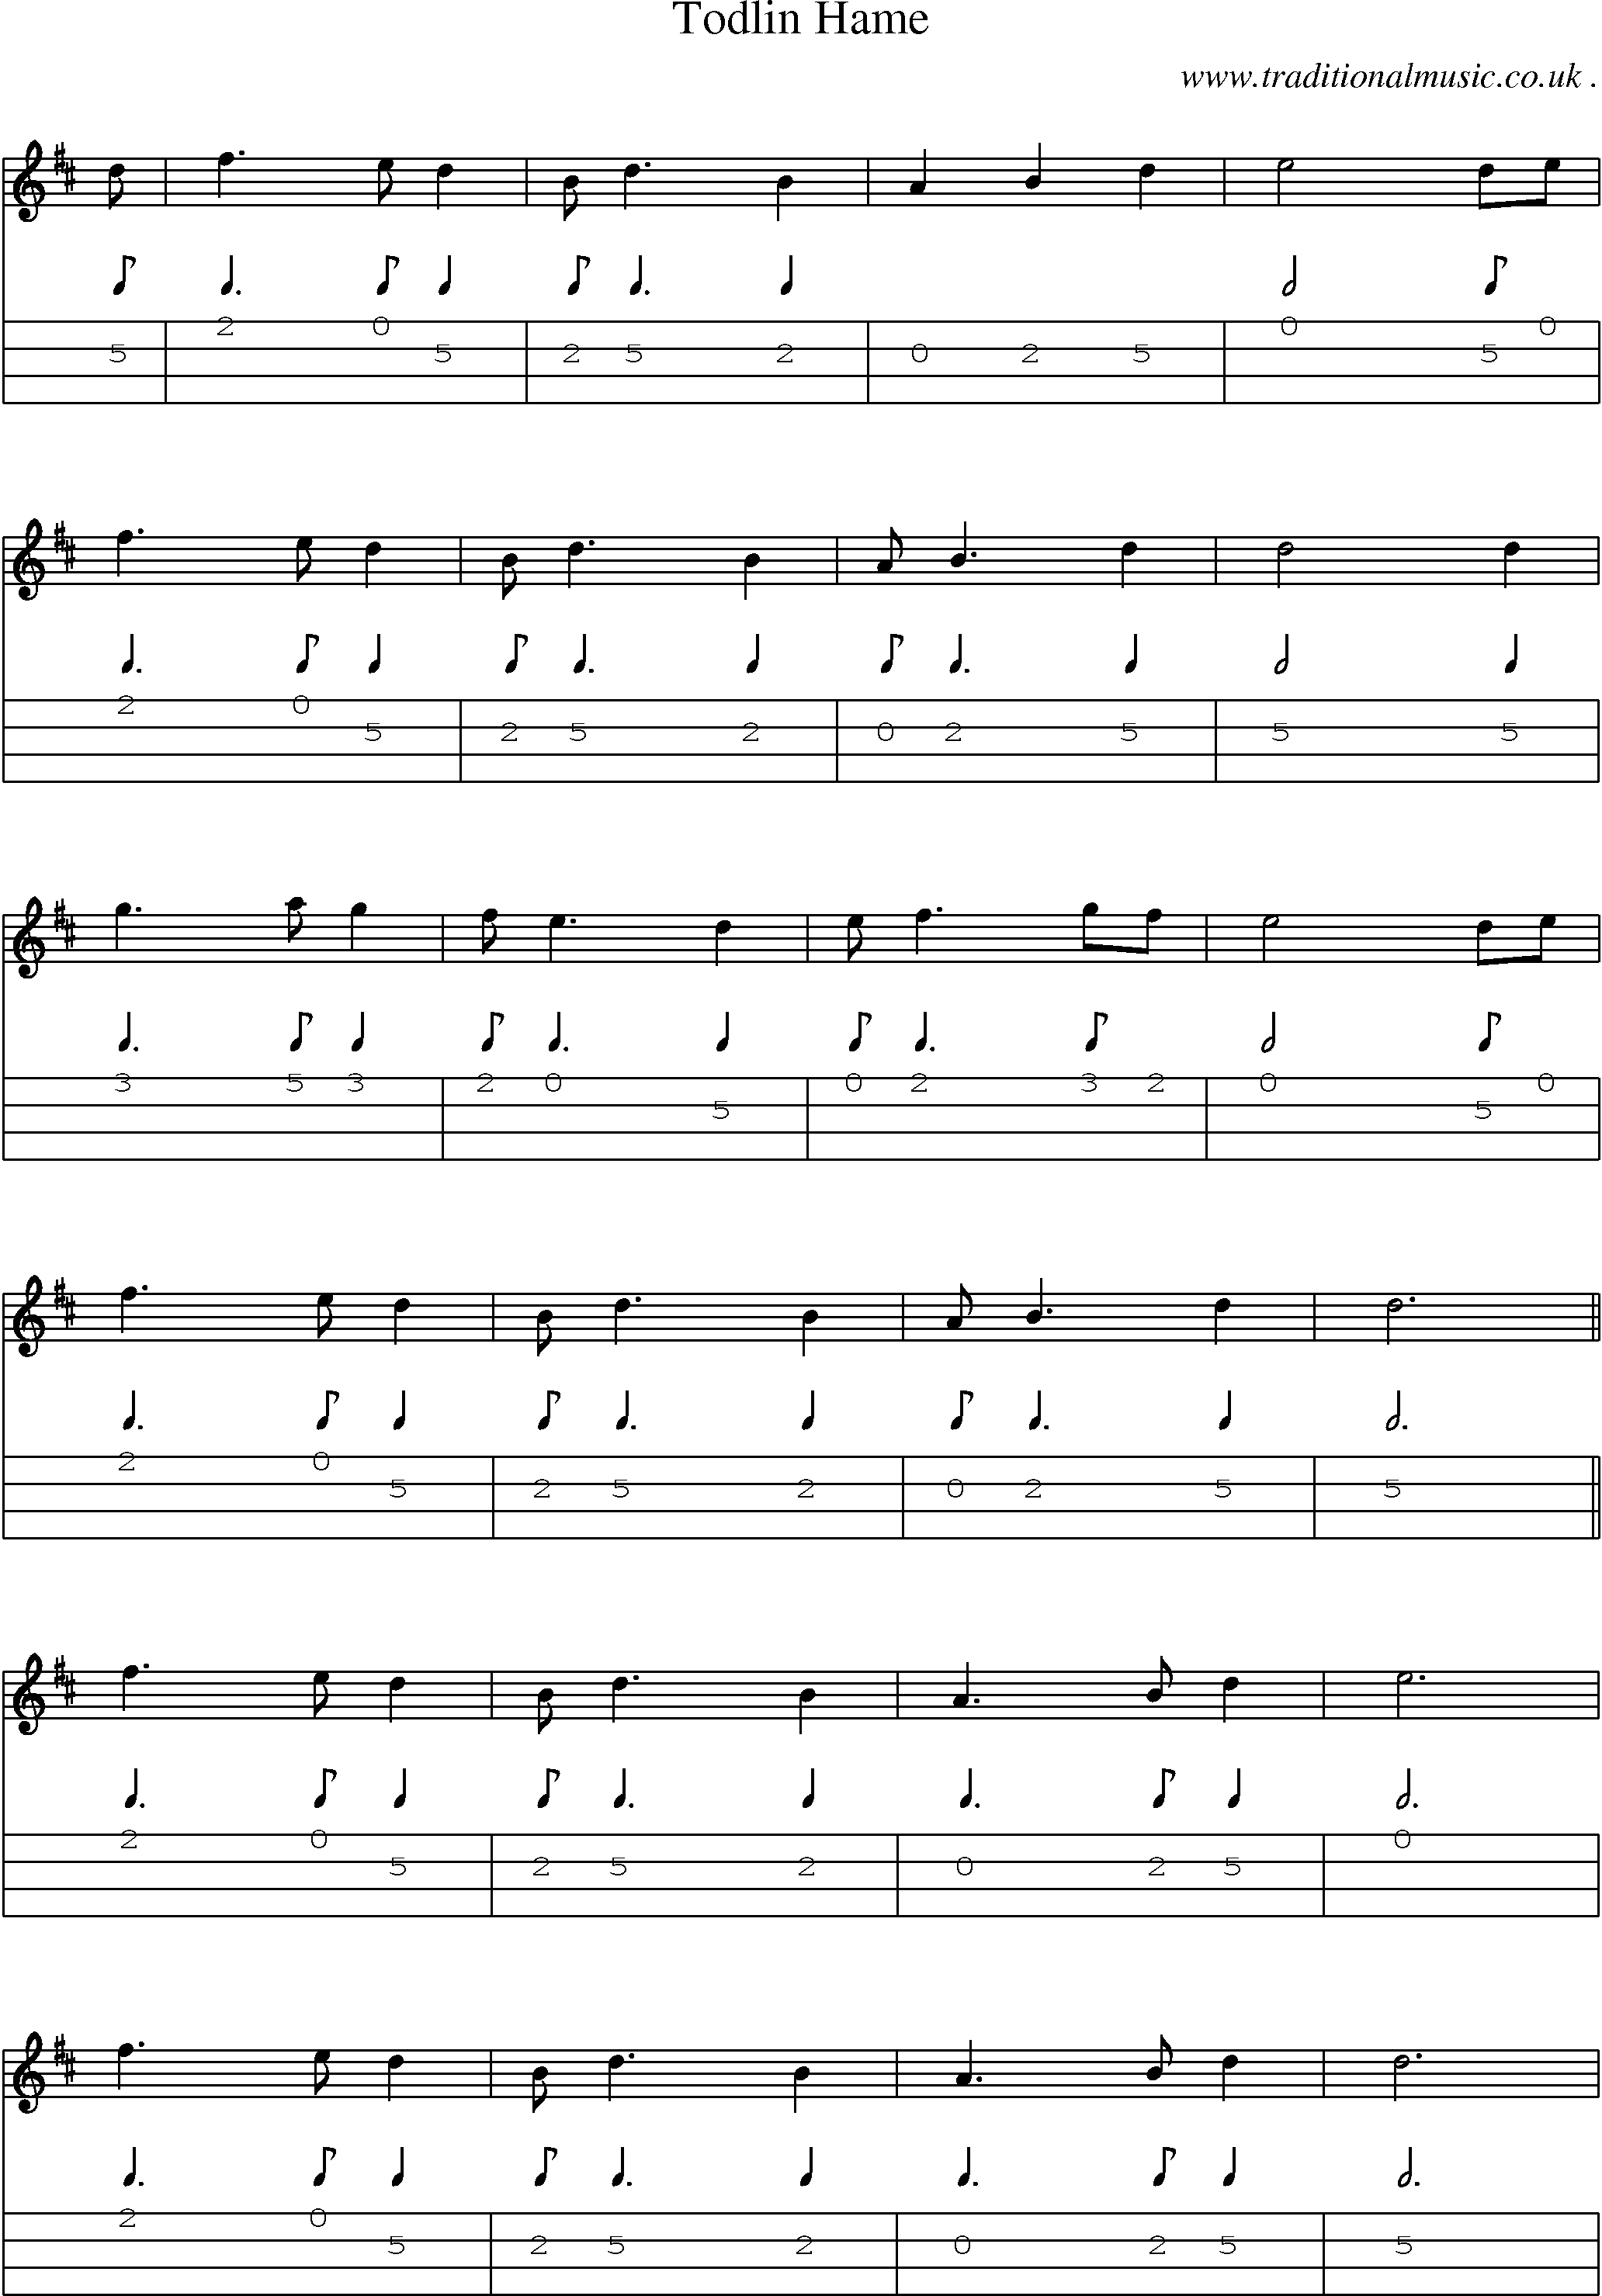 Sheet-music  score, Chords and Mandolin Tabs for Todlin Hame